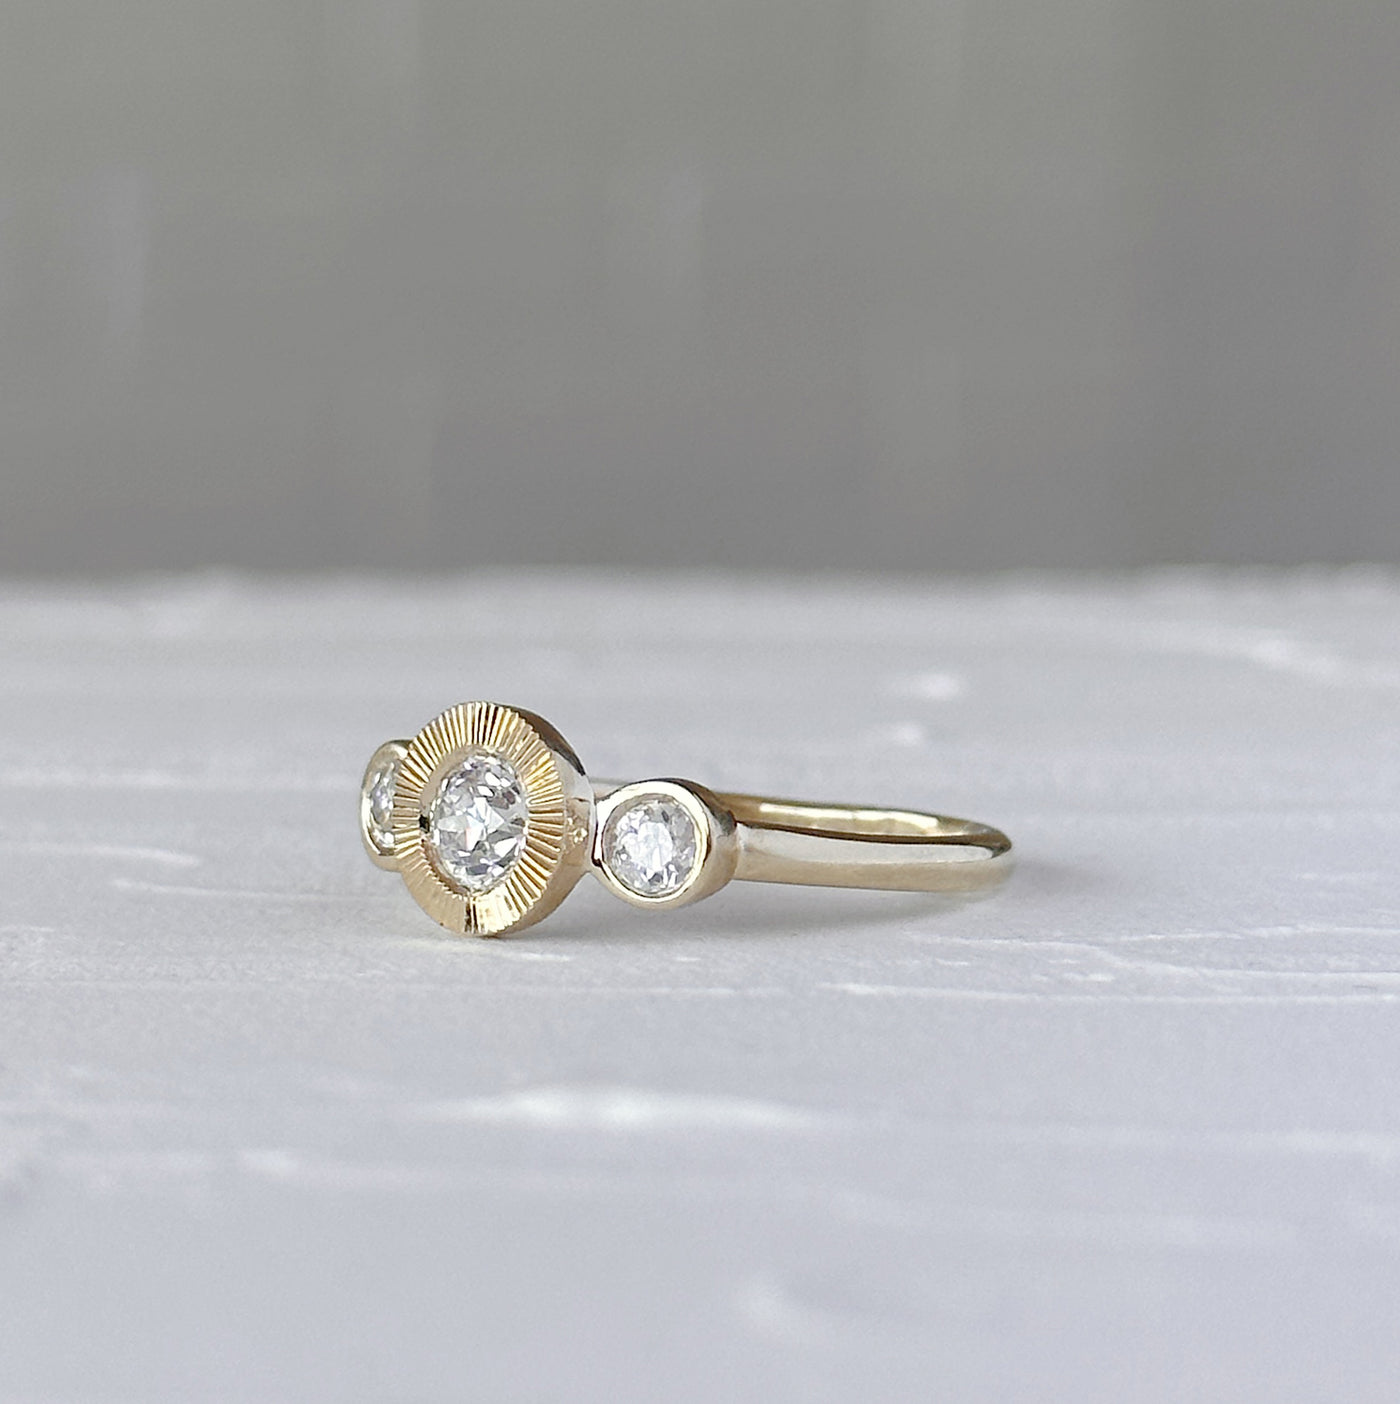 Polaris Ring with Old Mine Cut Diamond in front of a white wall, side angle